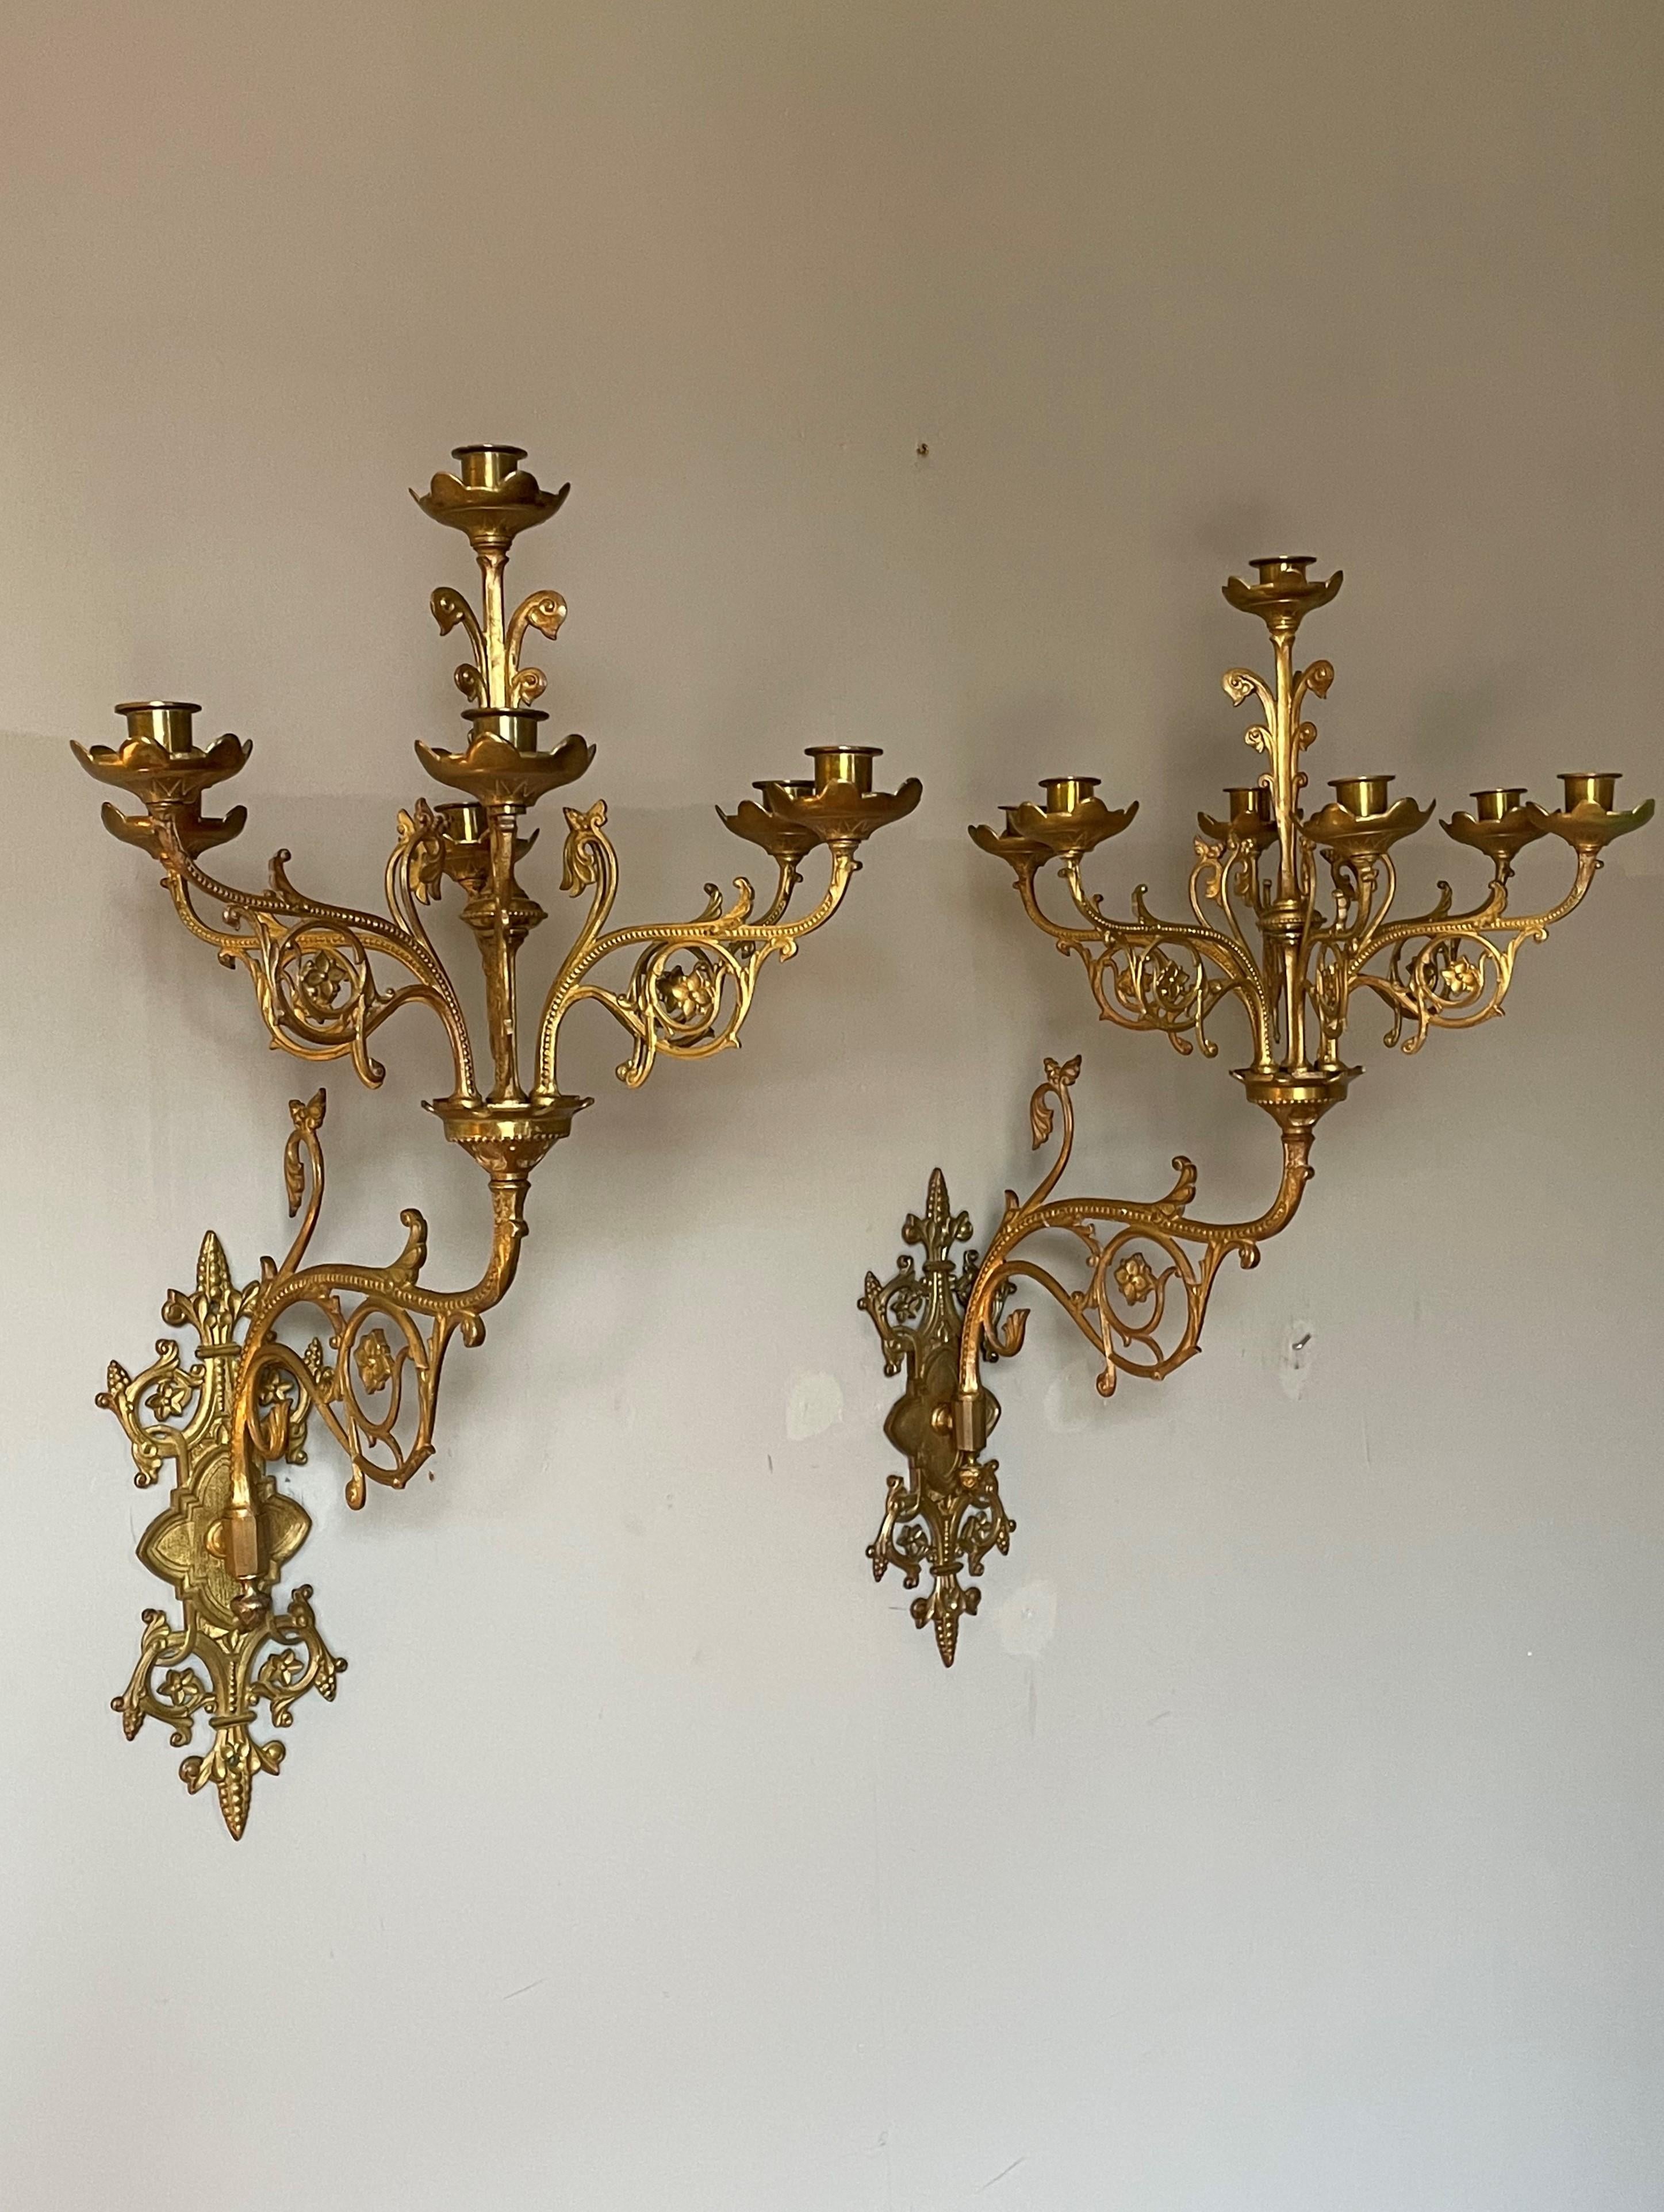 Large Pair of Gothic Revival Gilt Bronze Church Wall Candelabras Candle Sconces For Sale 9